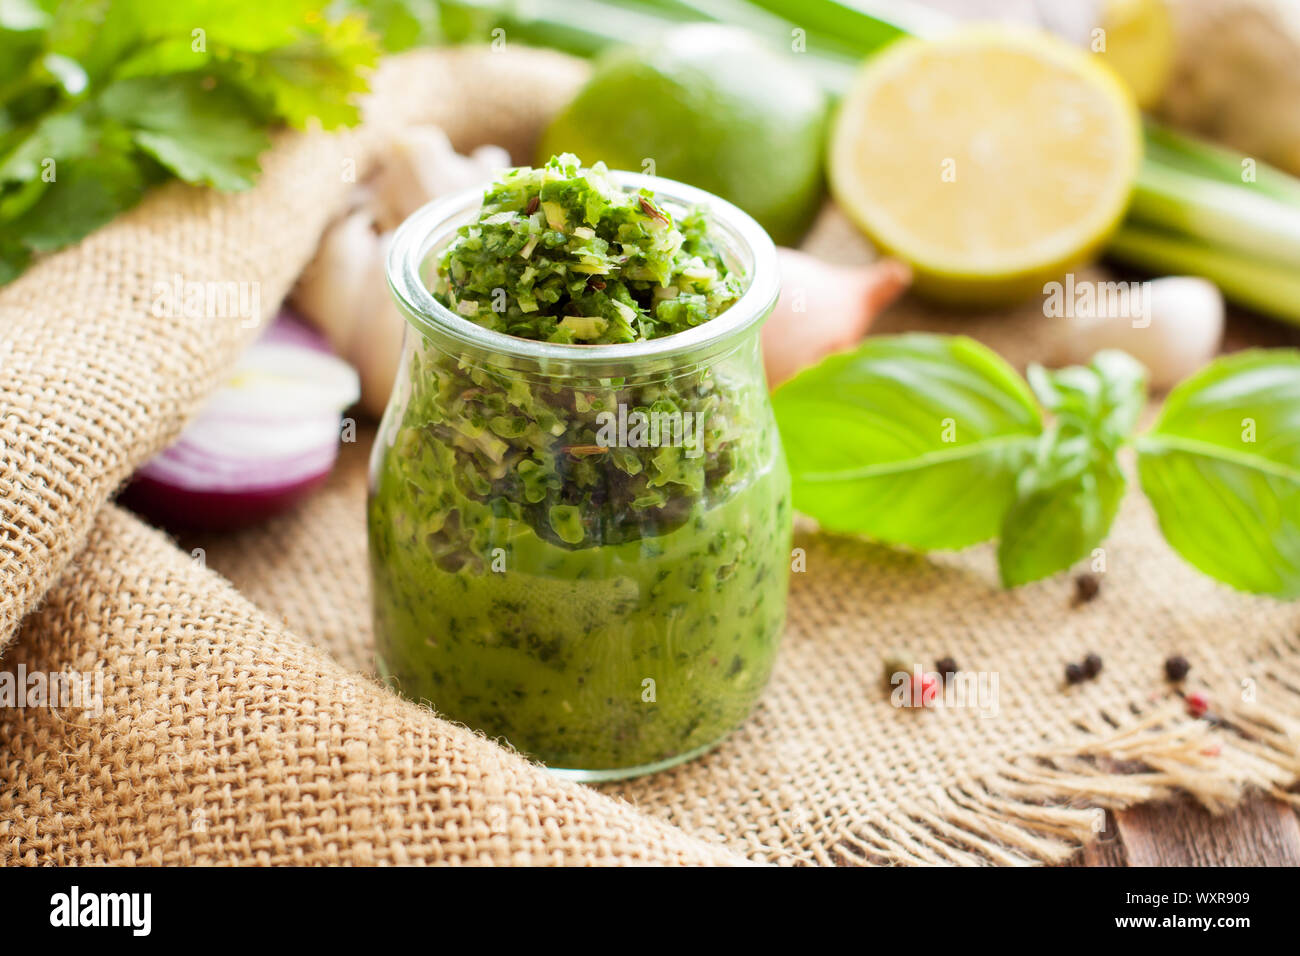 Green sauce in a glass jar in background with basil, lime, onion and parsley. Thai green curry paste Stock Photo